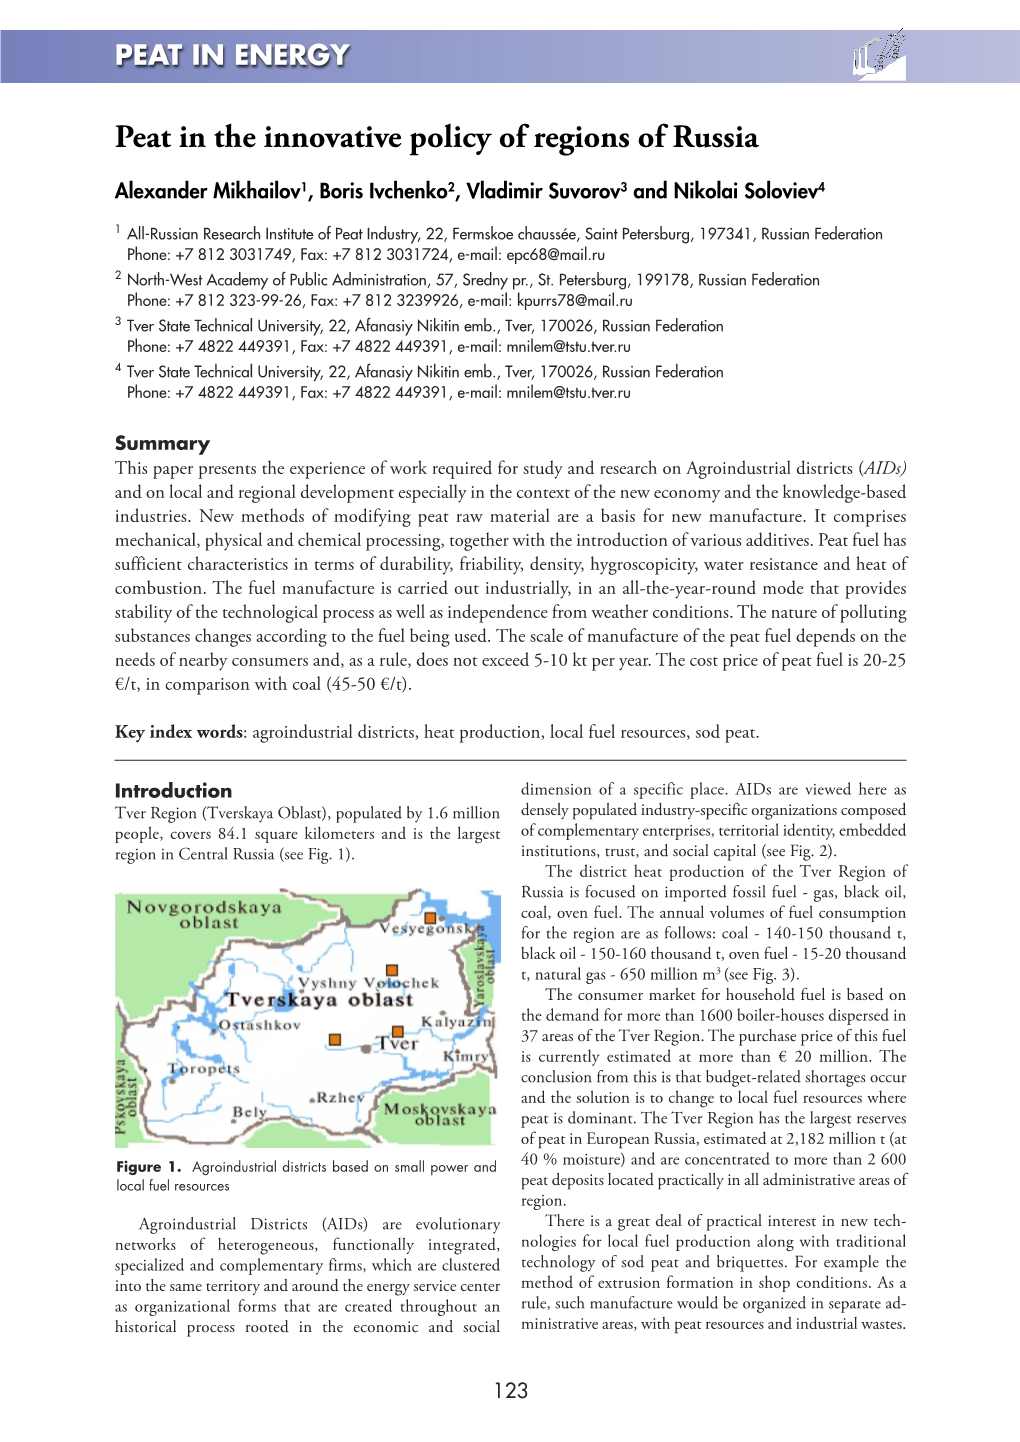 Peat in the Innovative Policy of Regions of Russia